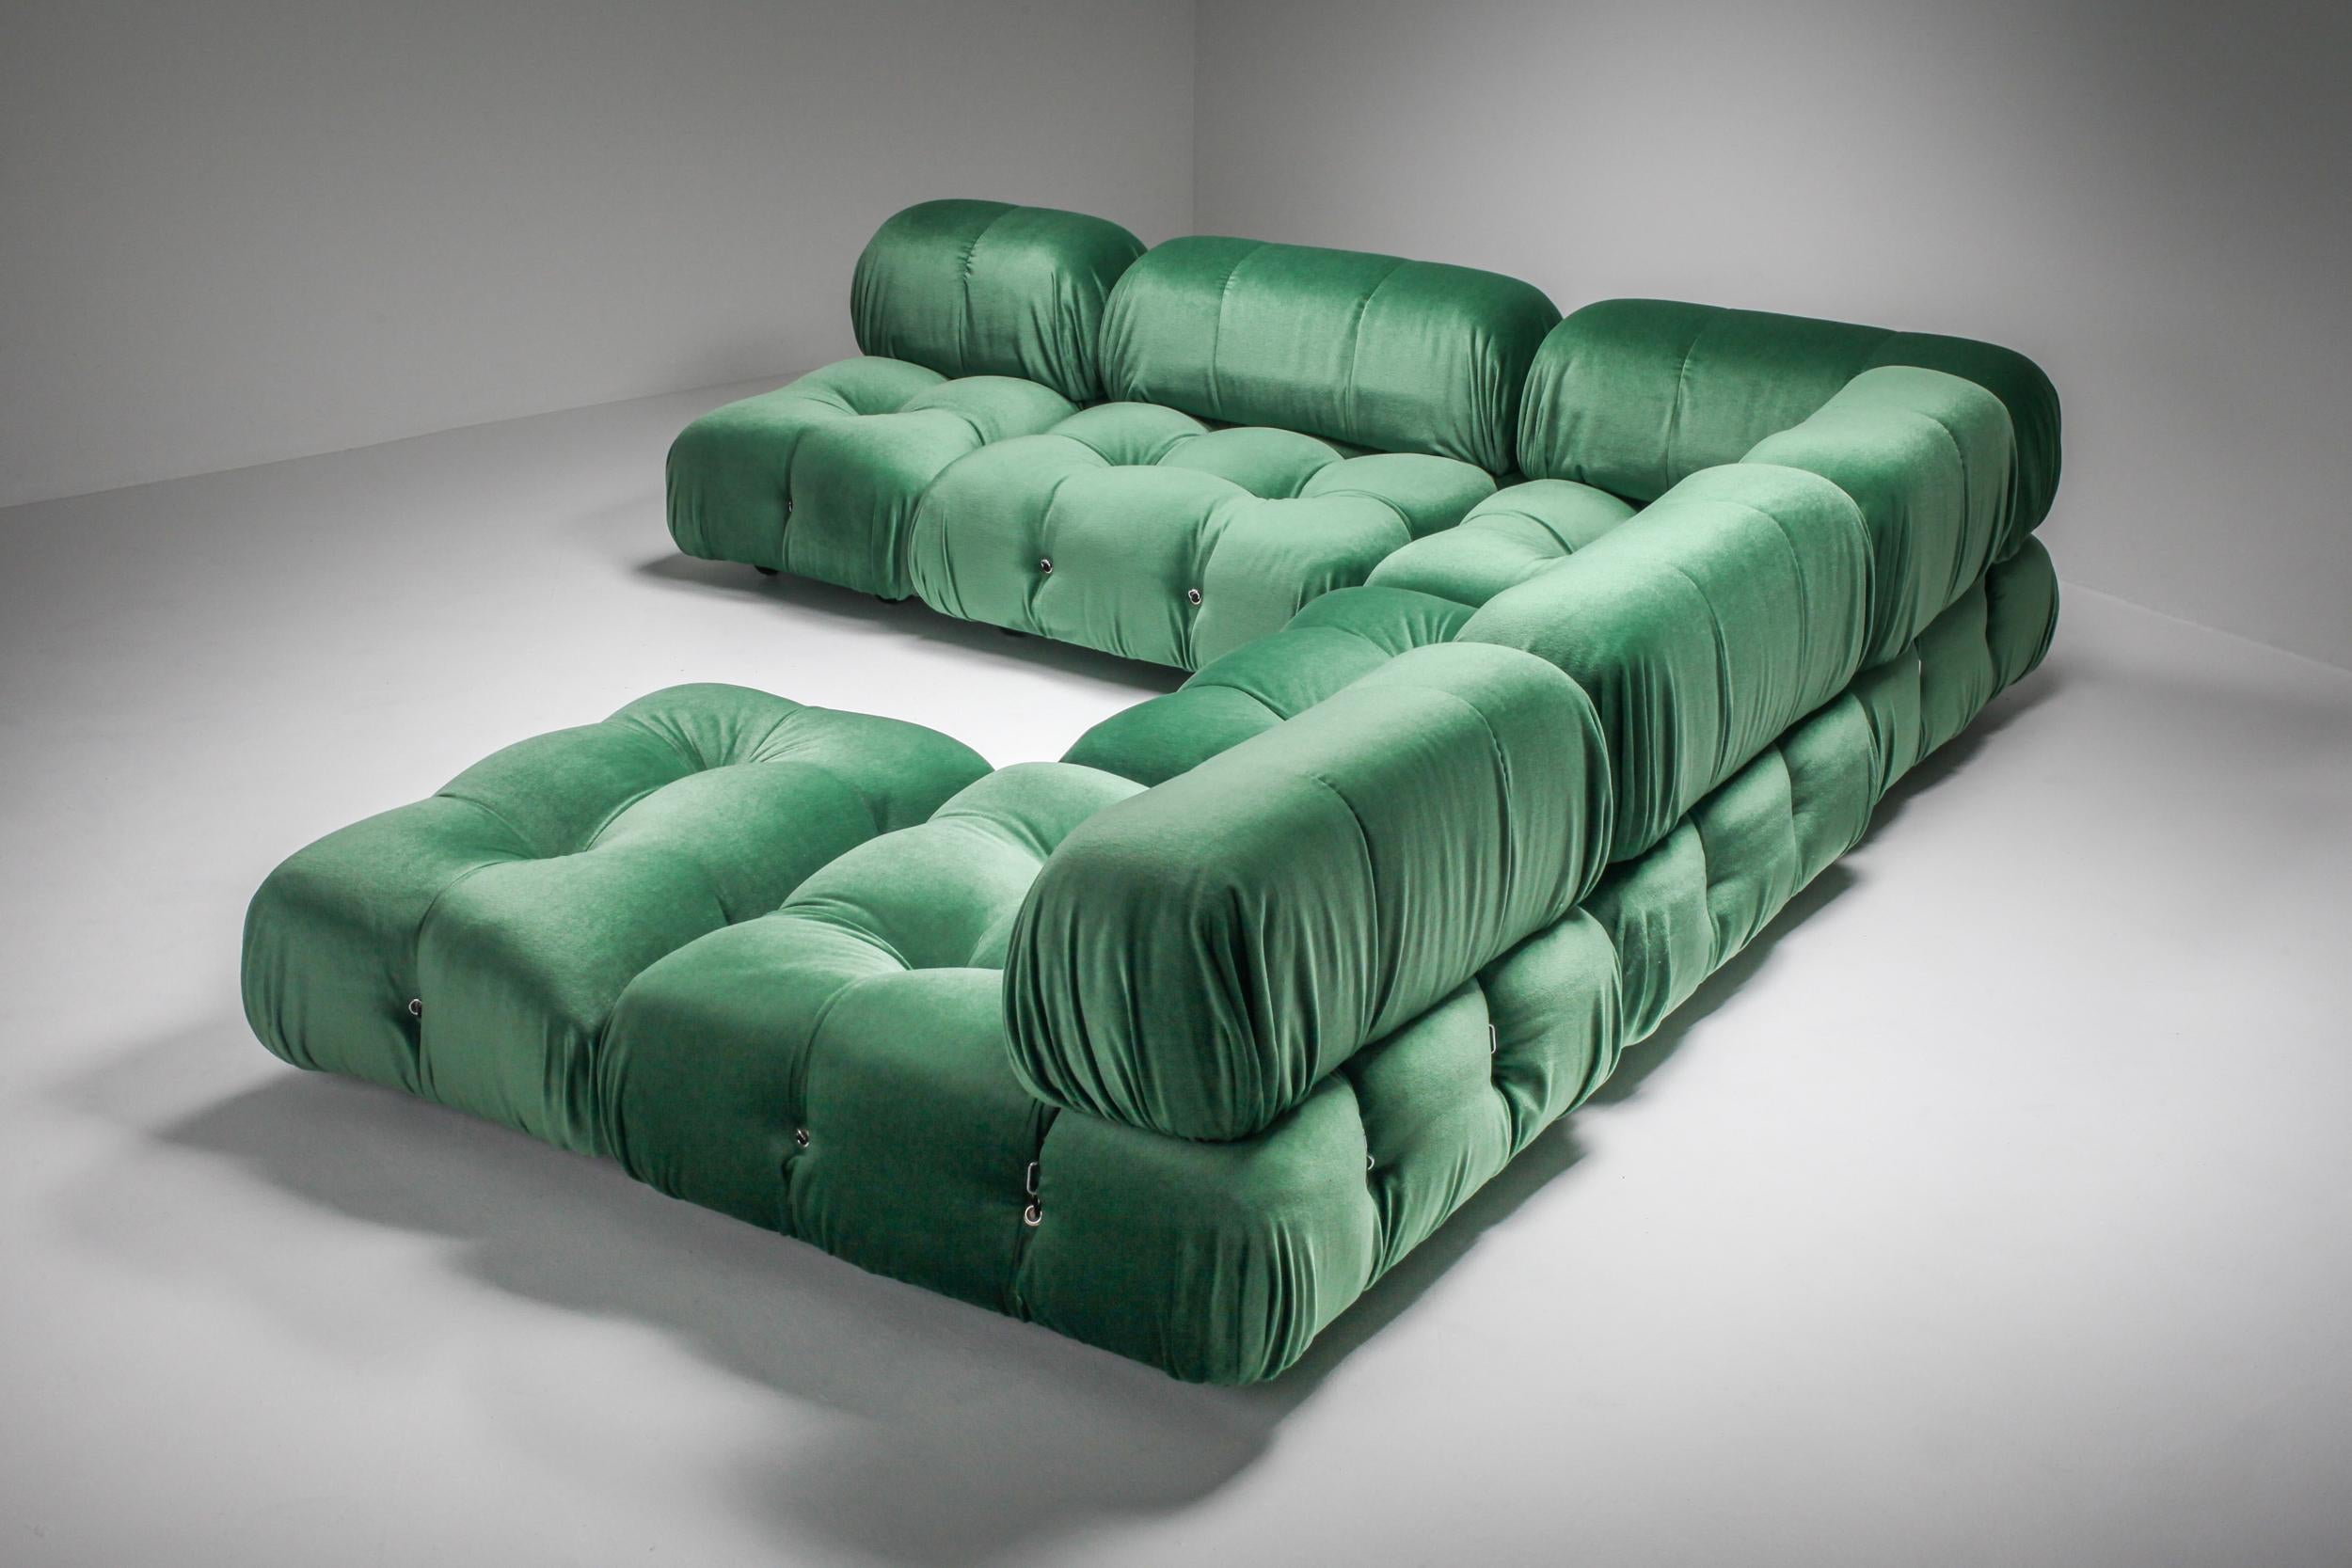 Camaleonda, Mario Bellini, vintage modular camaleonda, newly reupholstered in Pierre Frey

Postmodern modular couch by Mario Bellini for B&B Italia in the 1970s. The entire sofa consists of 4 big seating elements, 4 backrests. The couch has been